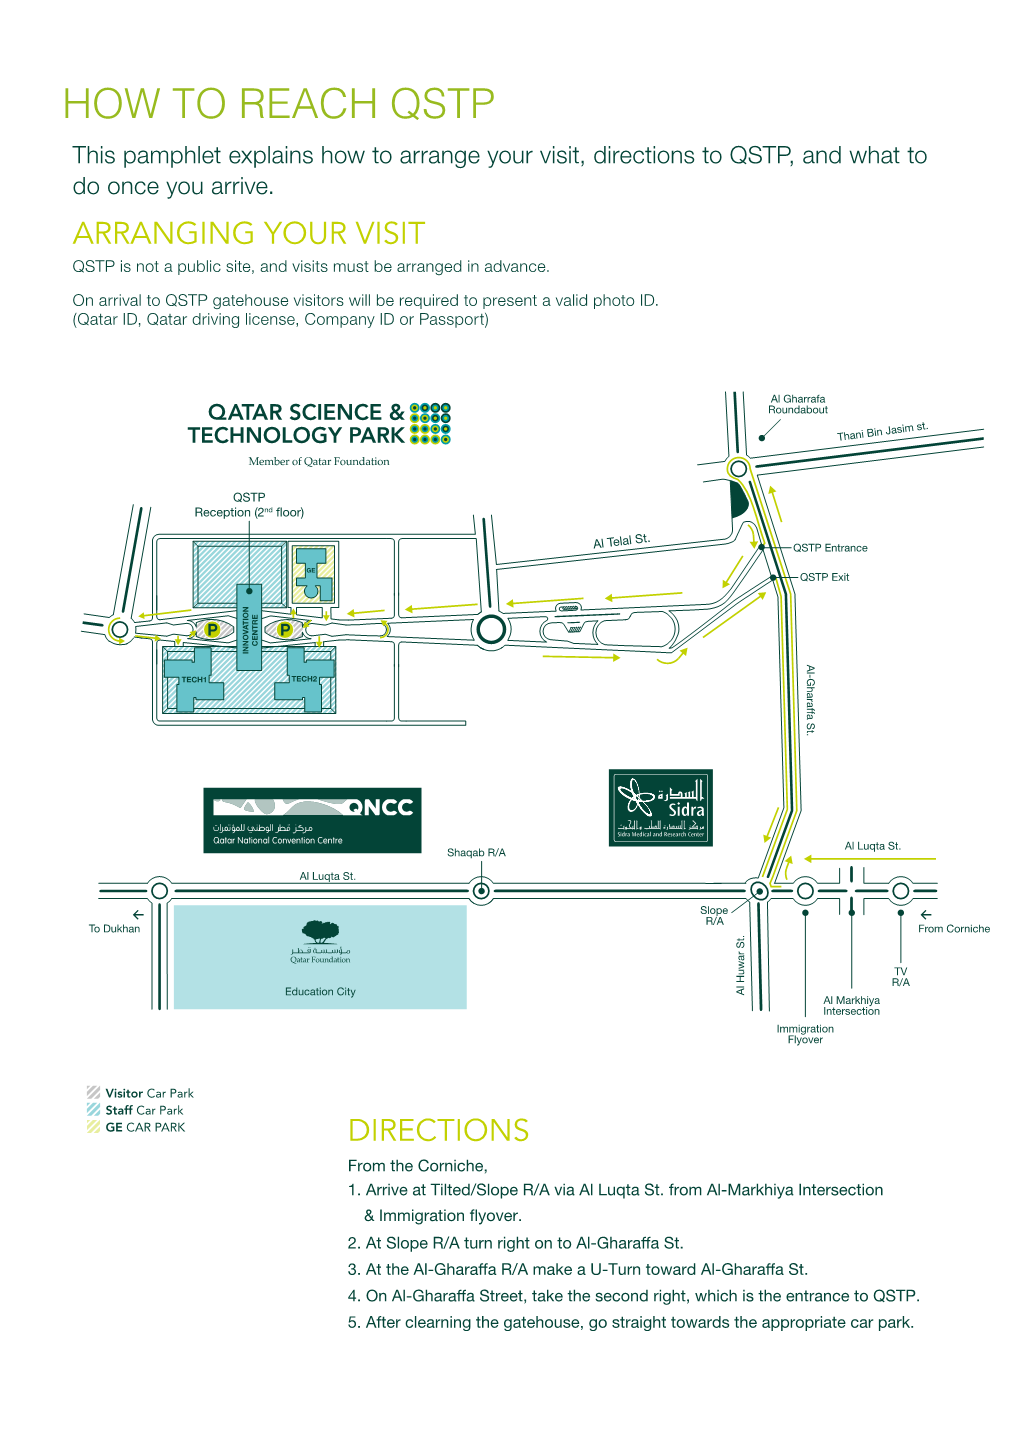 HOW to REACH QSTP This Pamphlet Explains How to Arrange Your Visit, Directions to QSTP, and What to Do Once You Arrive